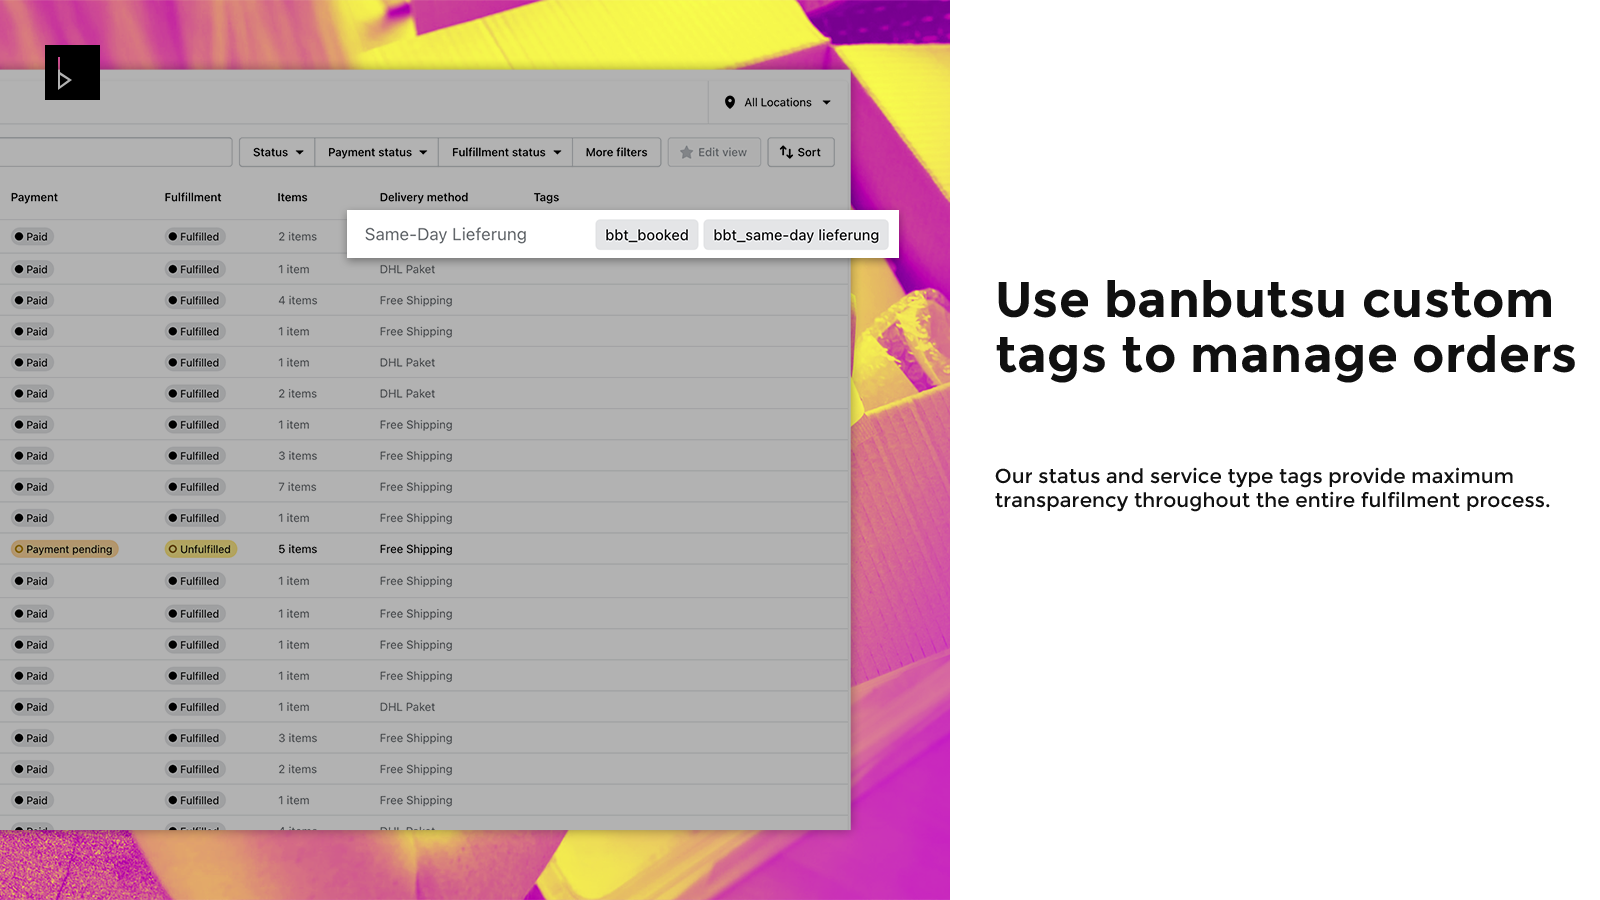 Use banbutsu custom tags to manage your orders